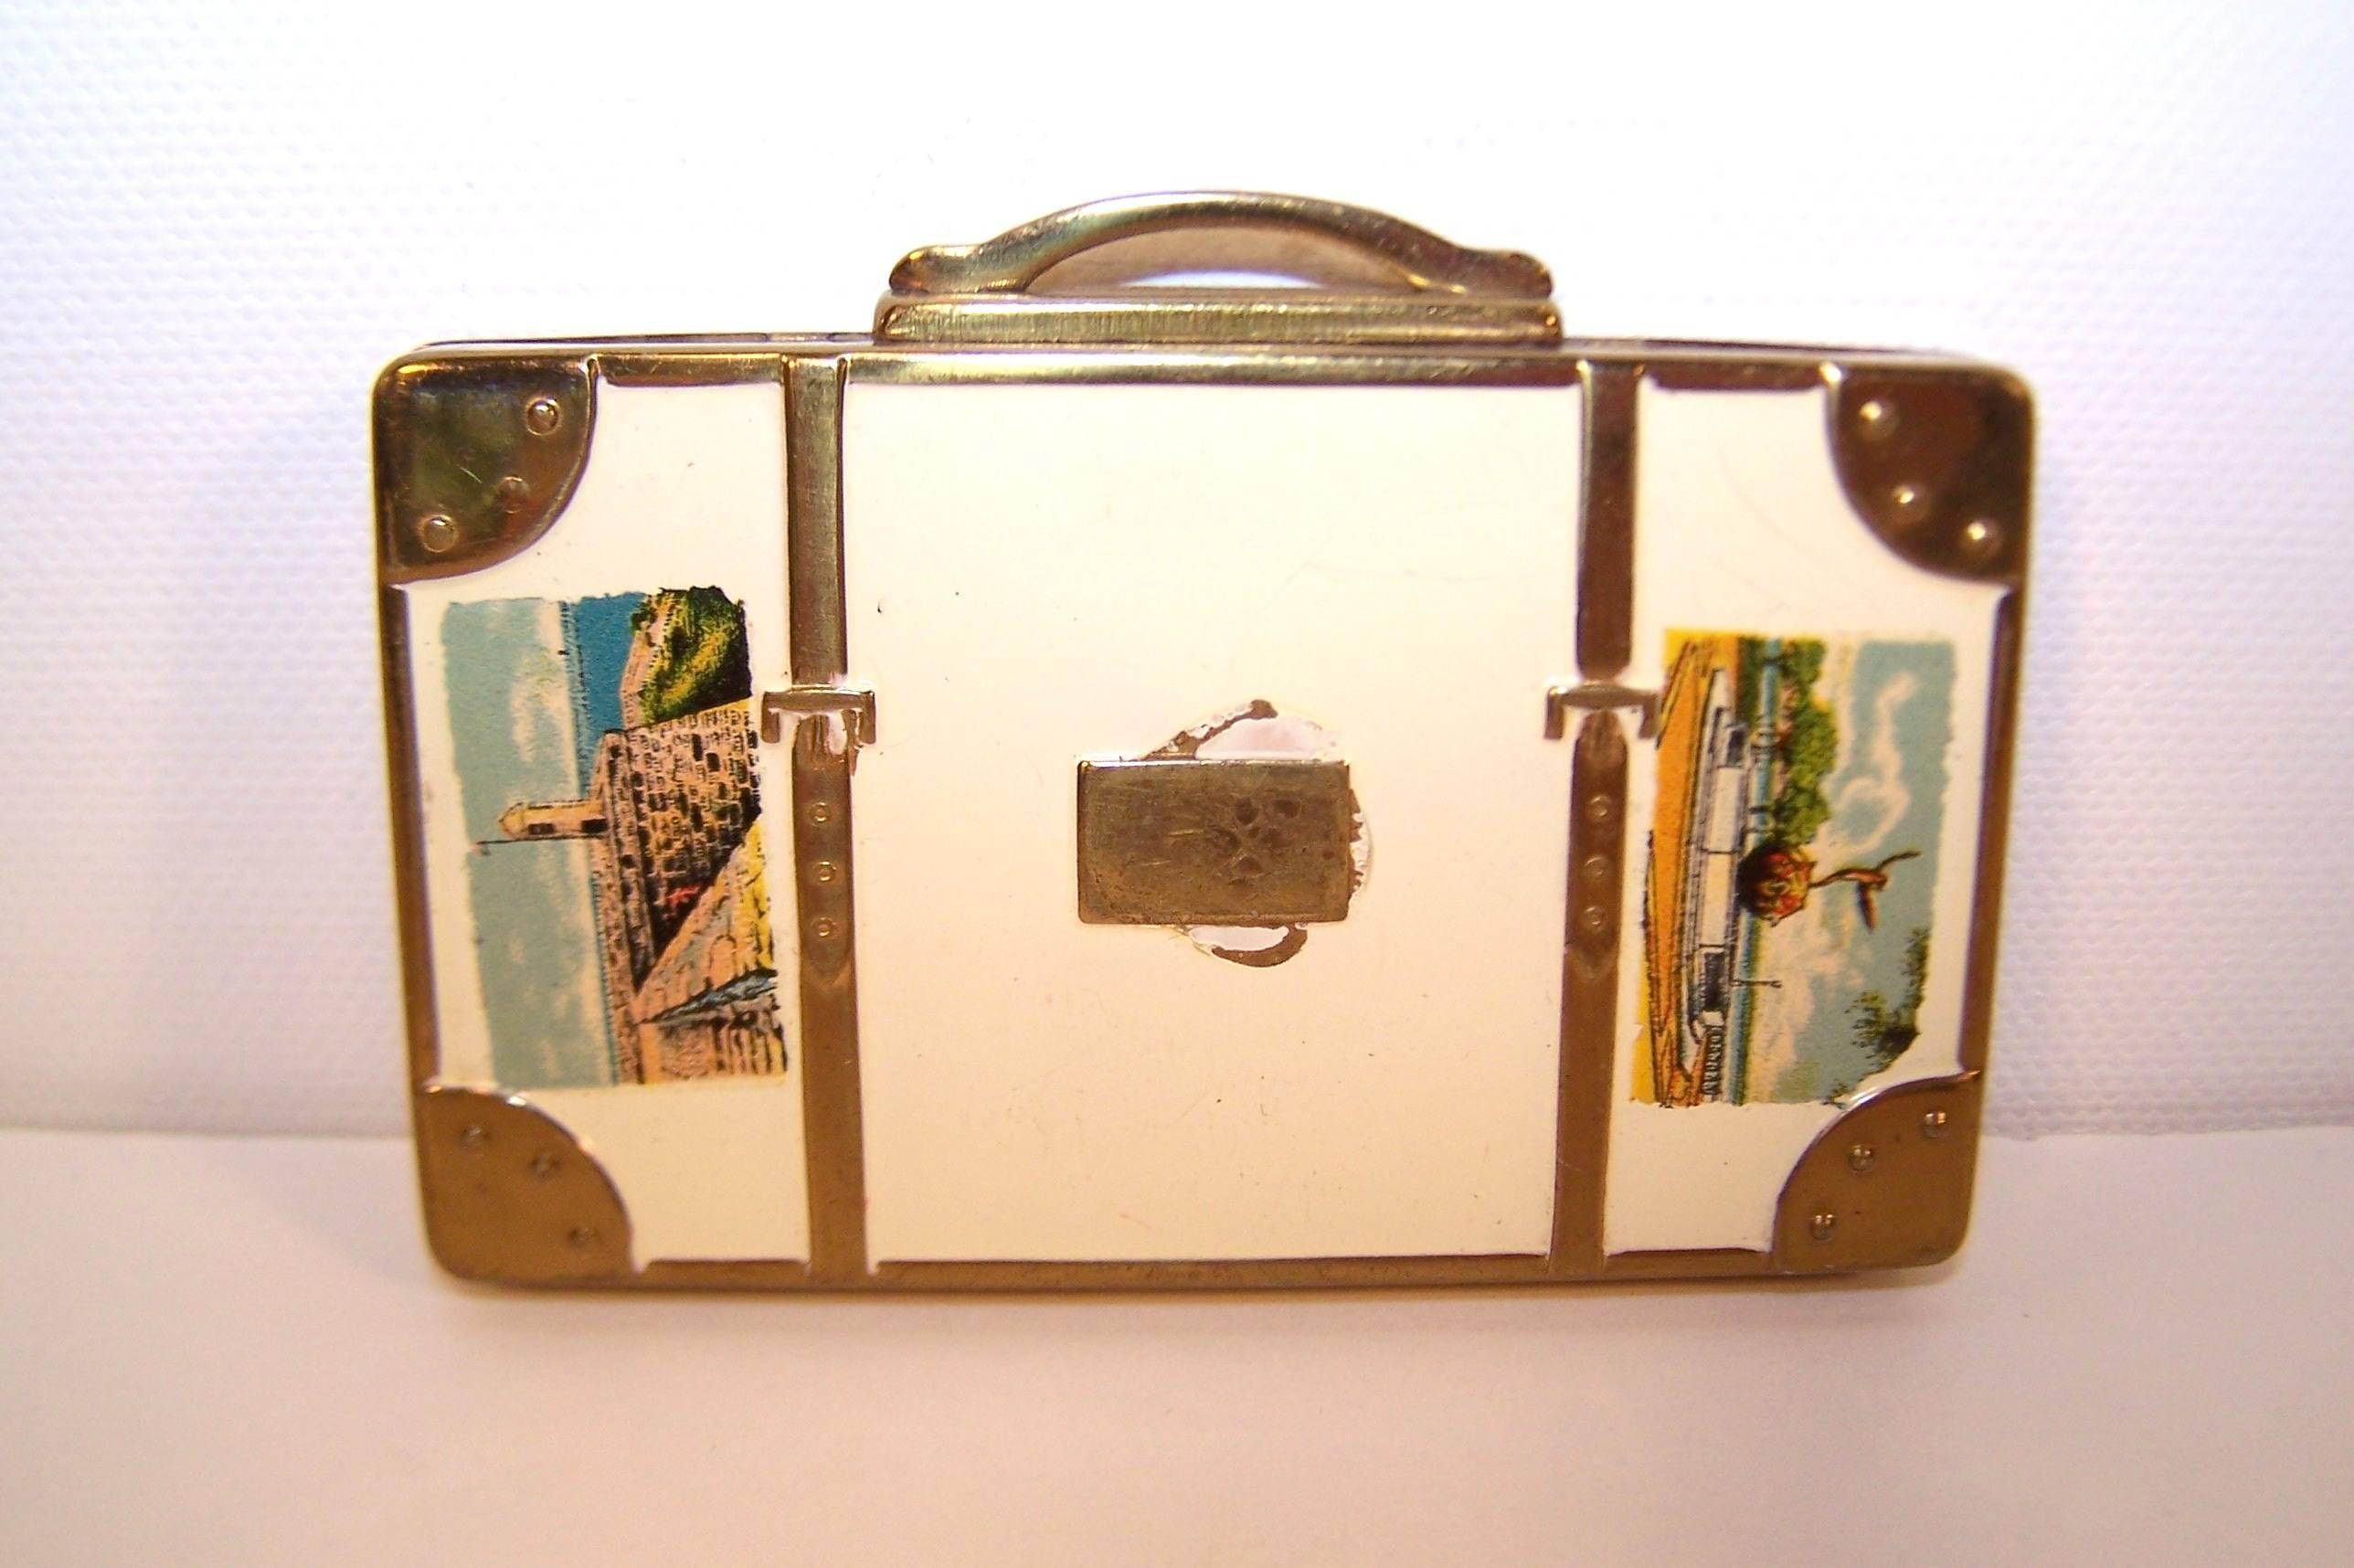 Women's Whimsical 1940's Miniature Suitcase Powder Compacts